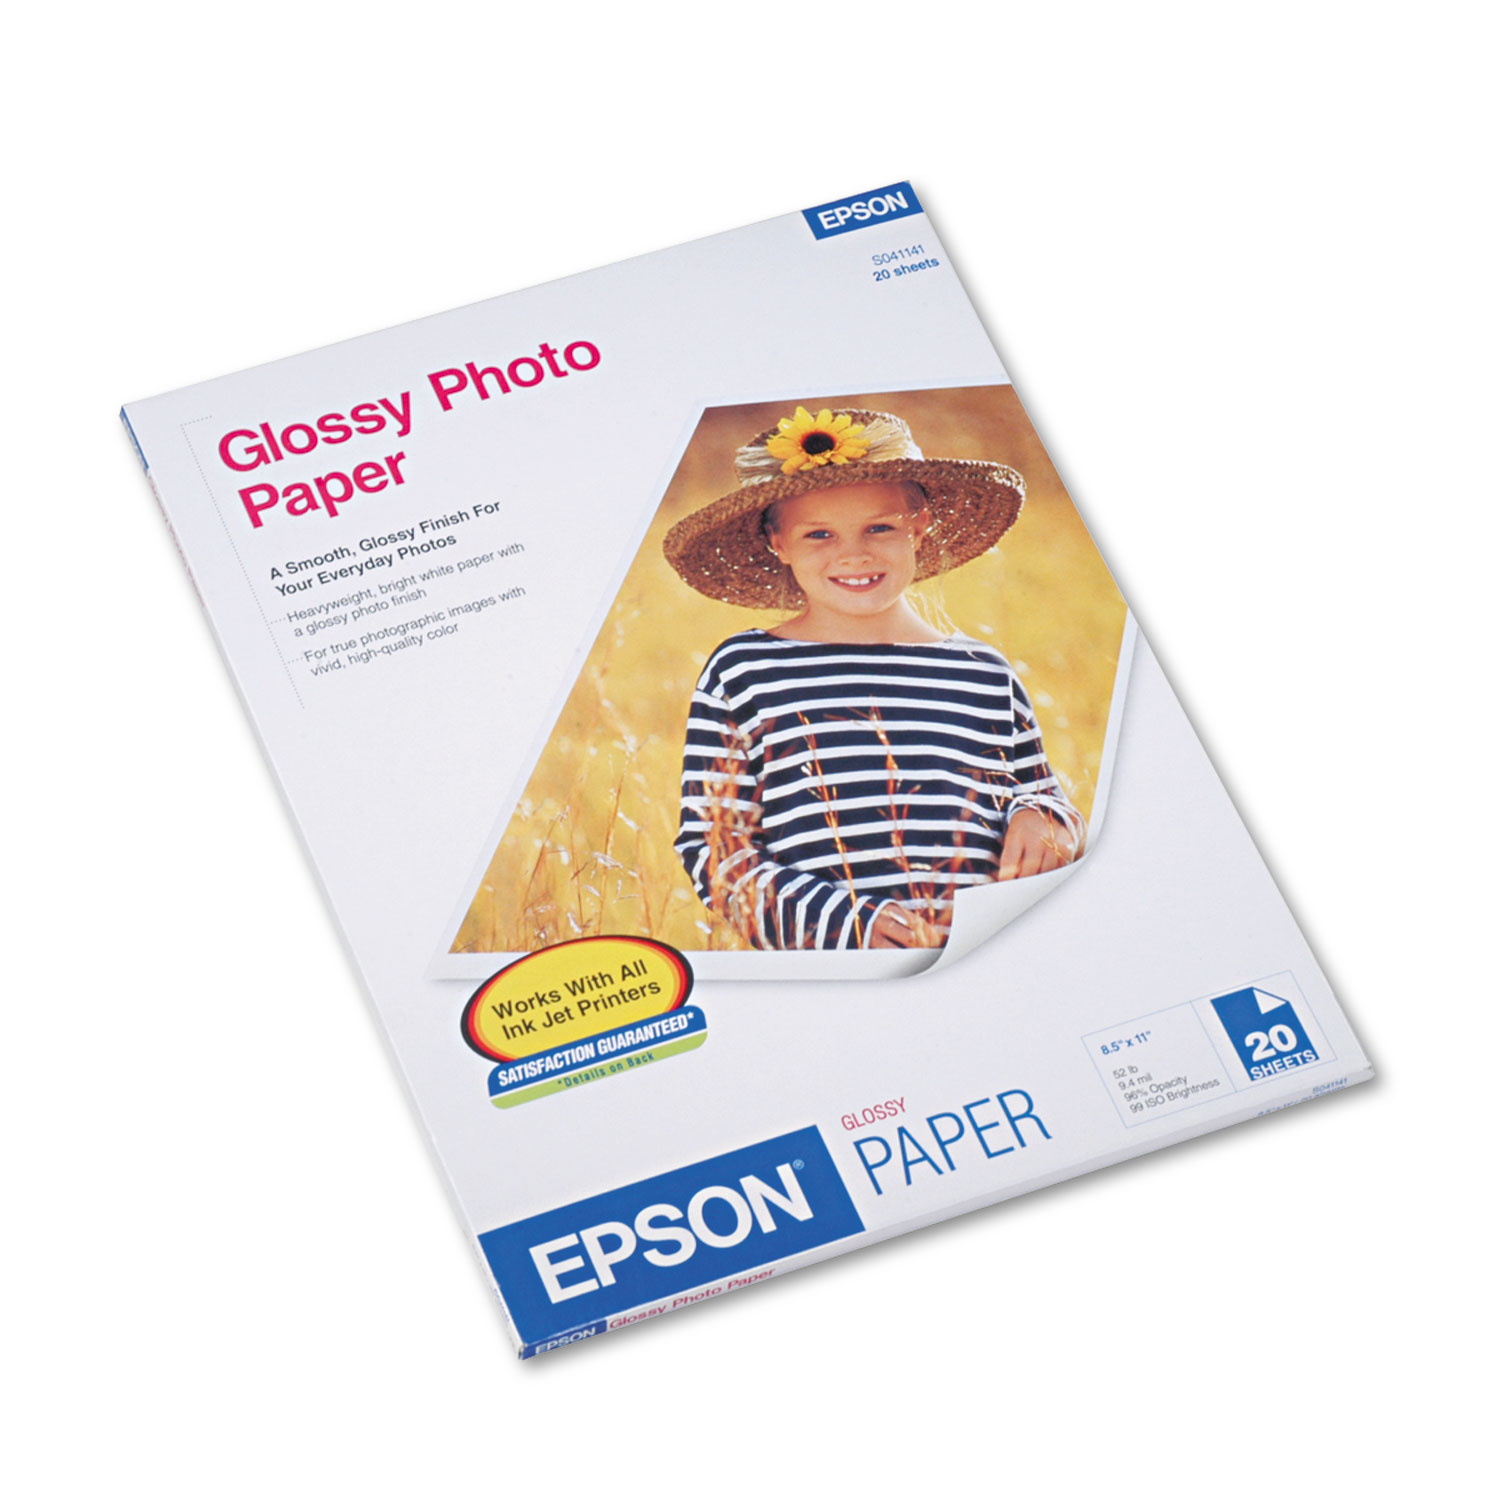  Epson S041141 Glossy Photo Paper, 9.4 mil, 8.5 x 11, Glossy White, 20/Pack (EPSS041141) 